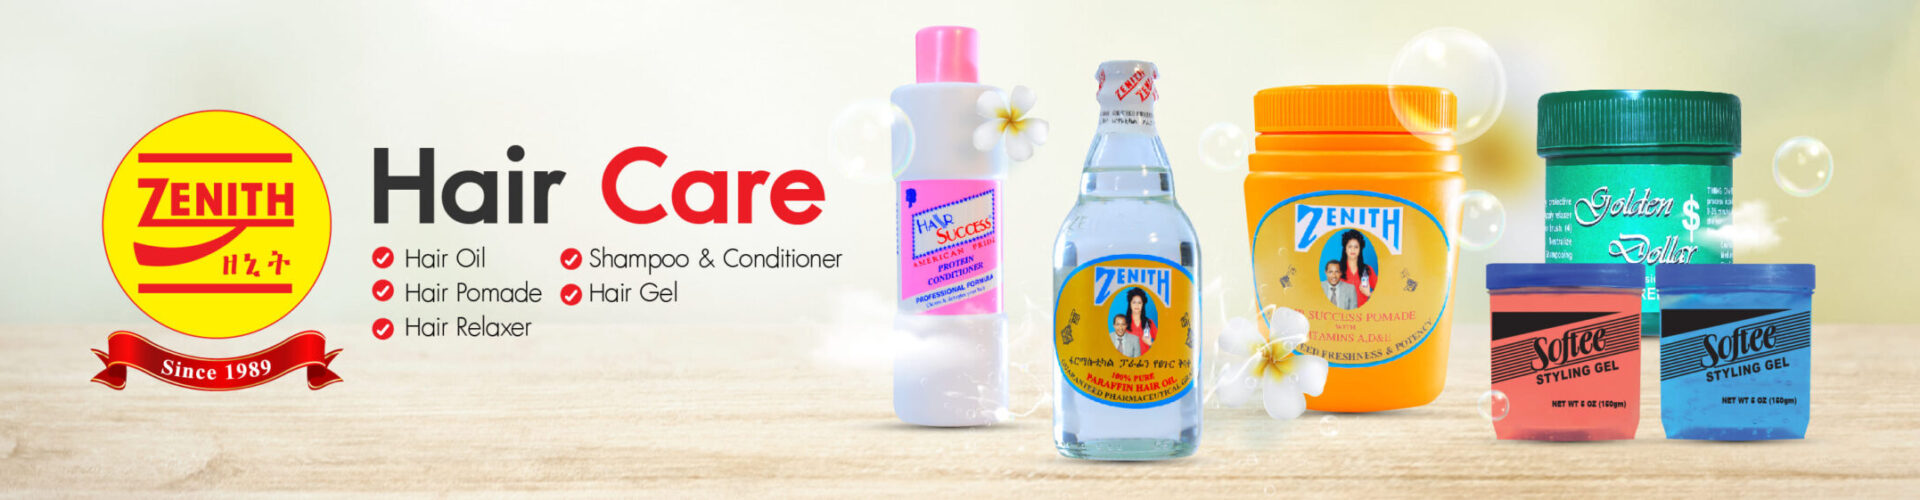 Hair-Care-01_0-scaled-1920x500